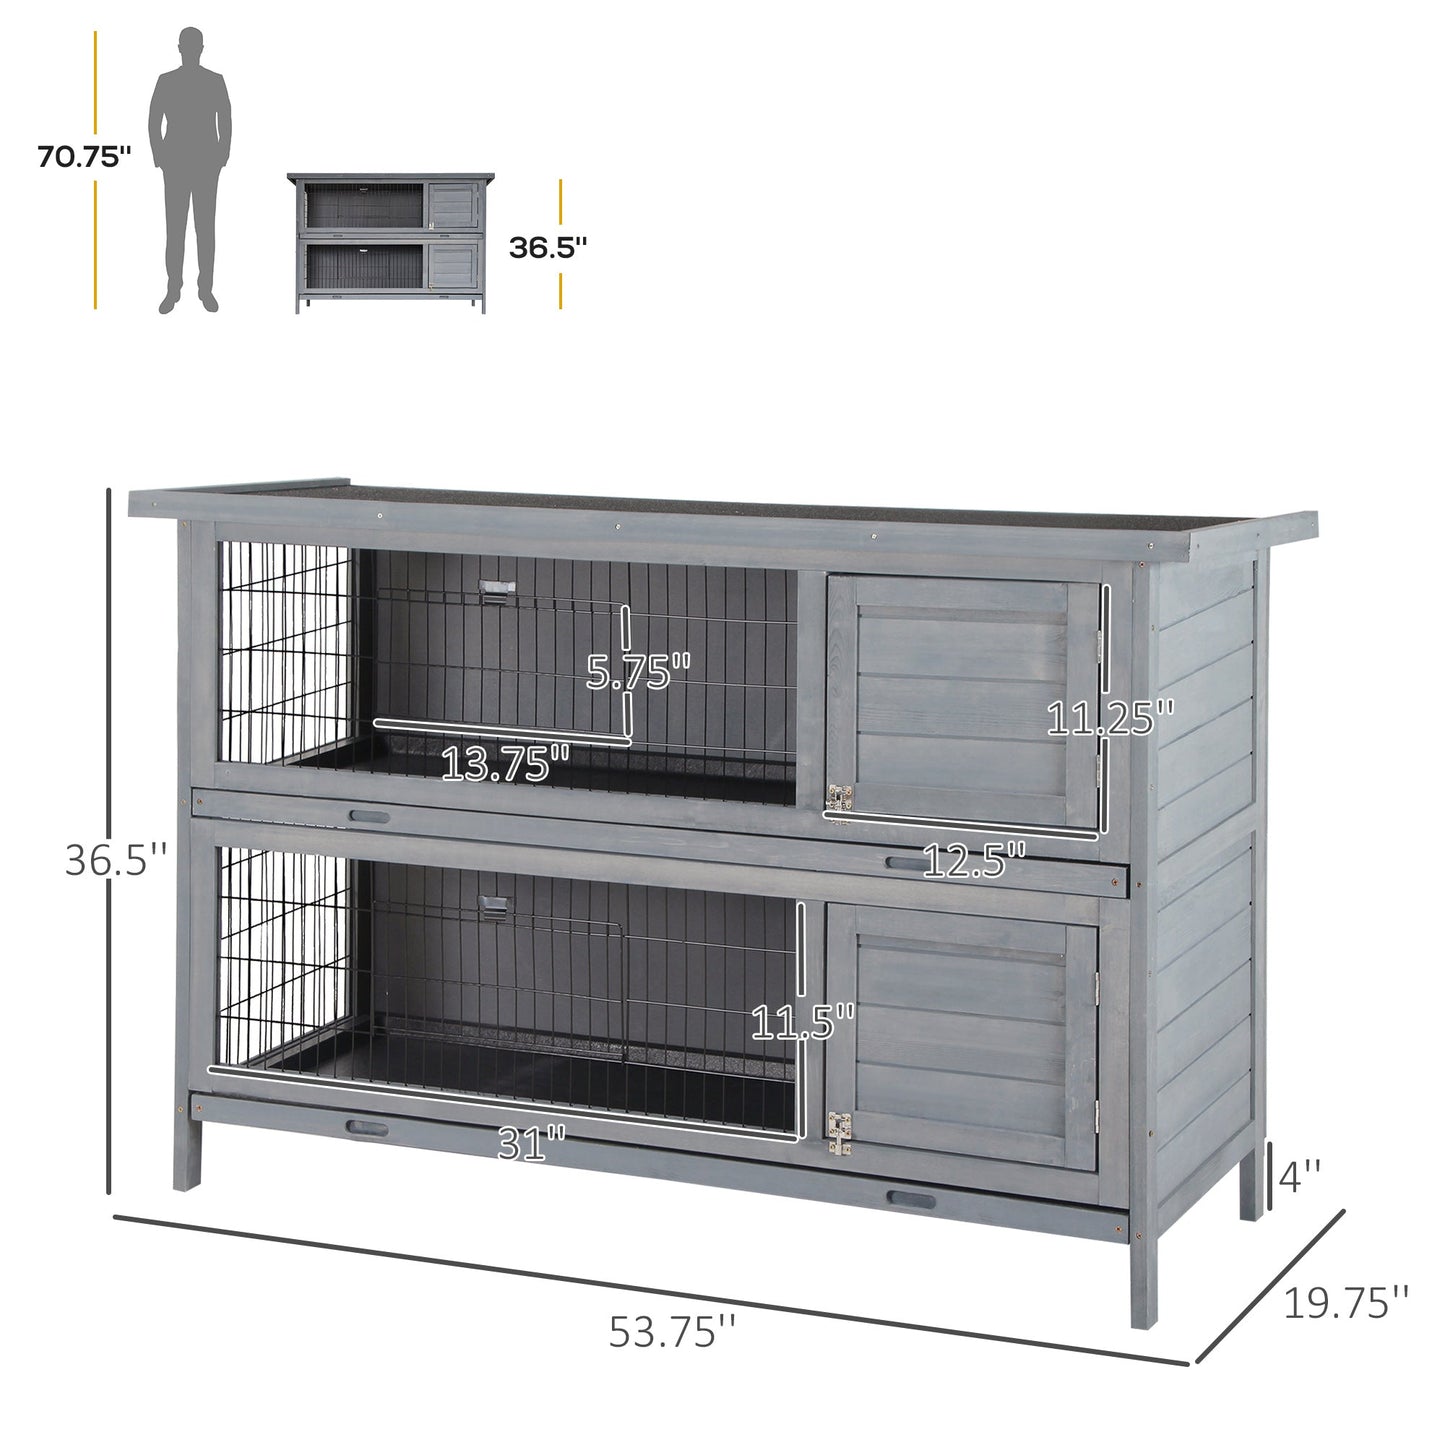 -PawHut 54" 2-Story Large Rabbit Hutch Bunny Cage, Wooden Pet House with Lockable Doors, No Leak Tray and waterproof Roof for Outdoor/Indoor, Gray - Outdoor Style Company